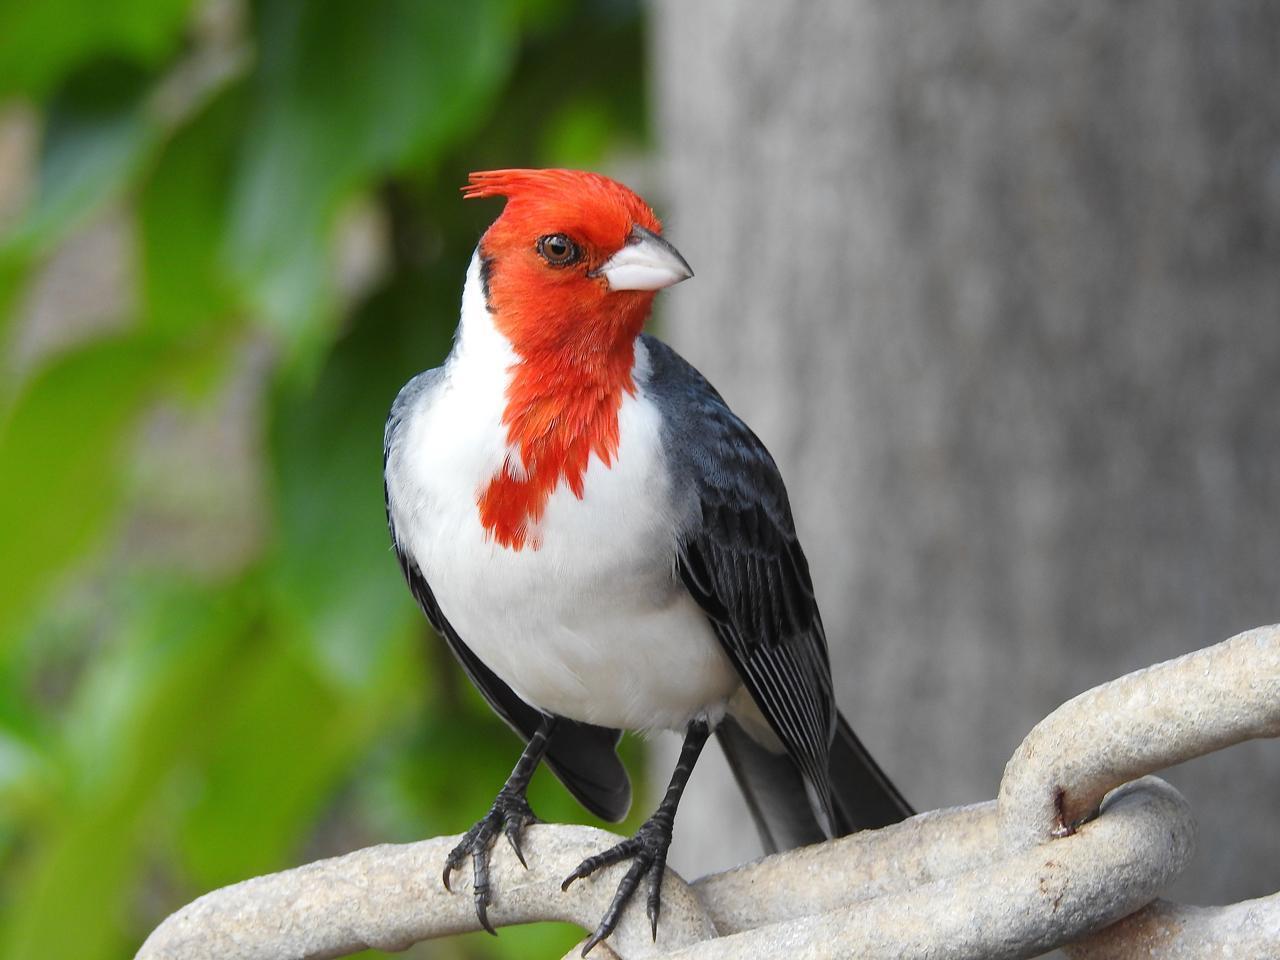 Red-crested Cardinal Photo by Brian Avent